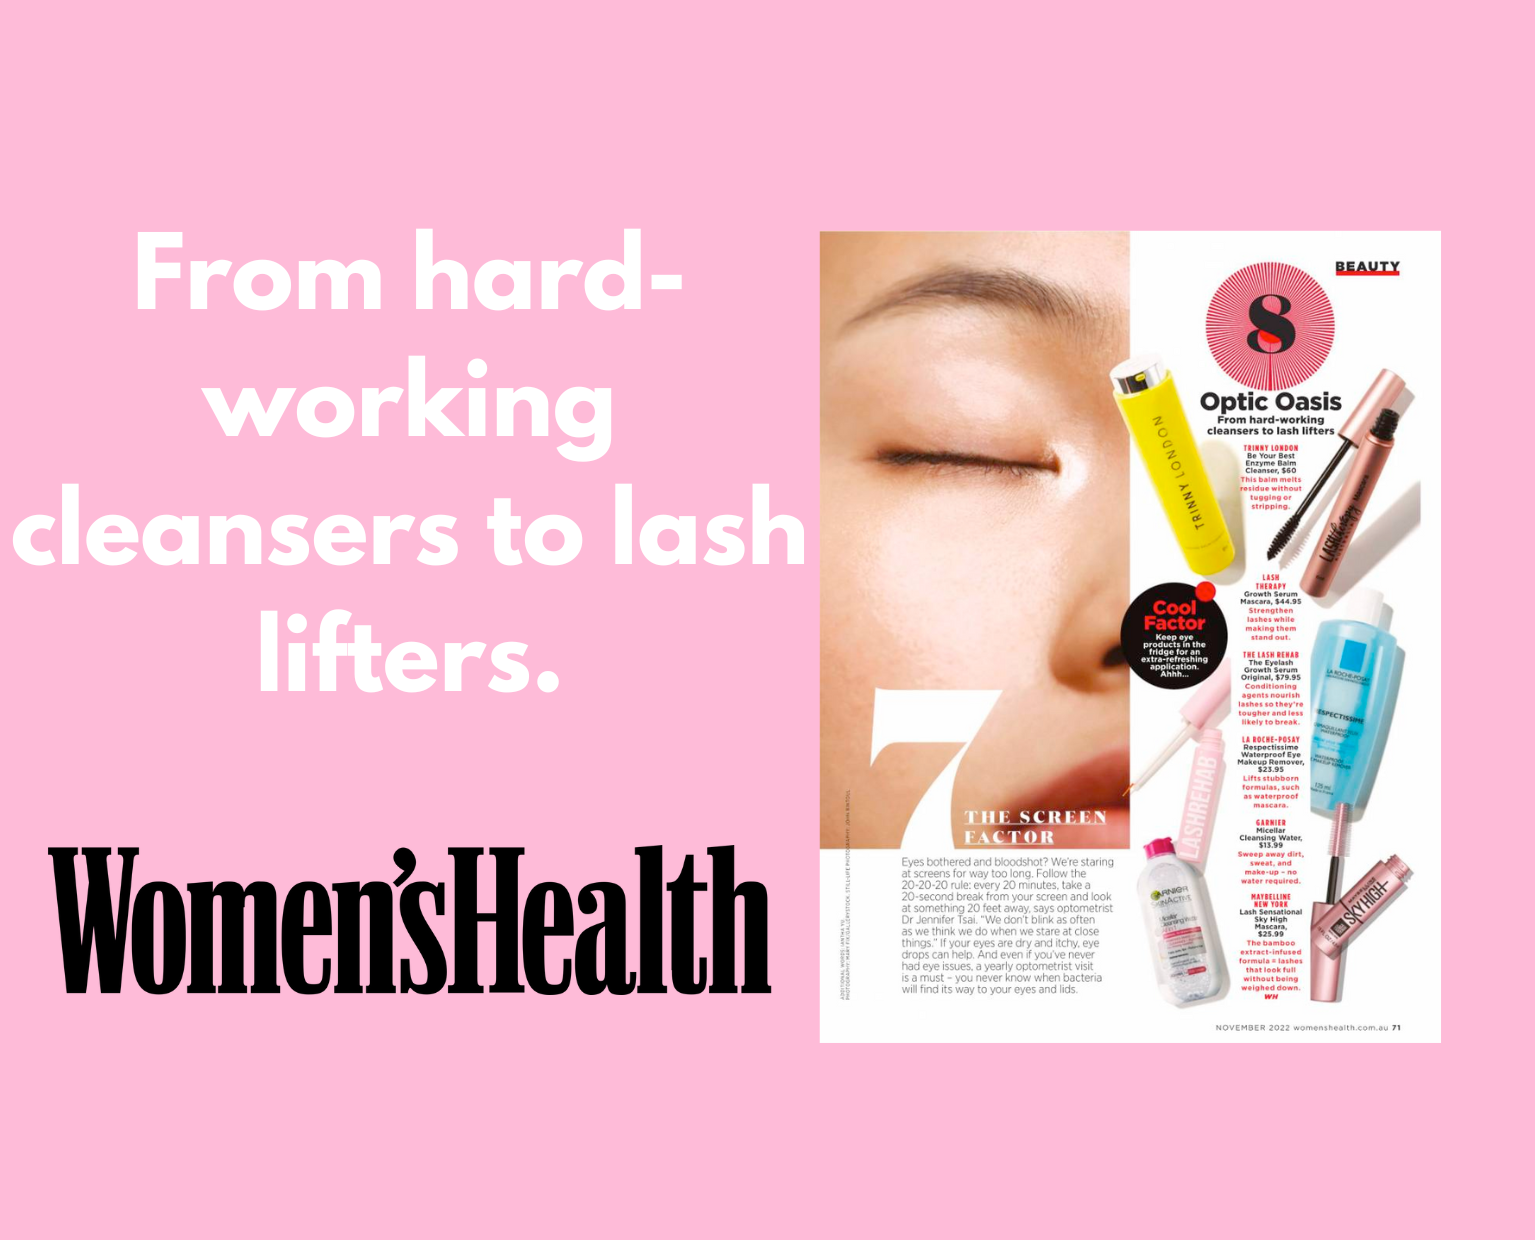 From hard-working cleansers to lash lifters.